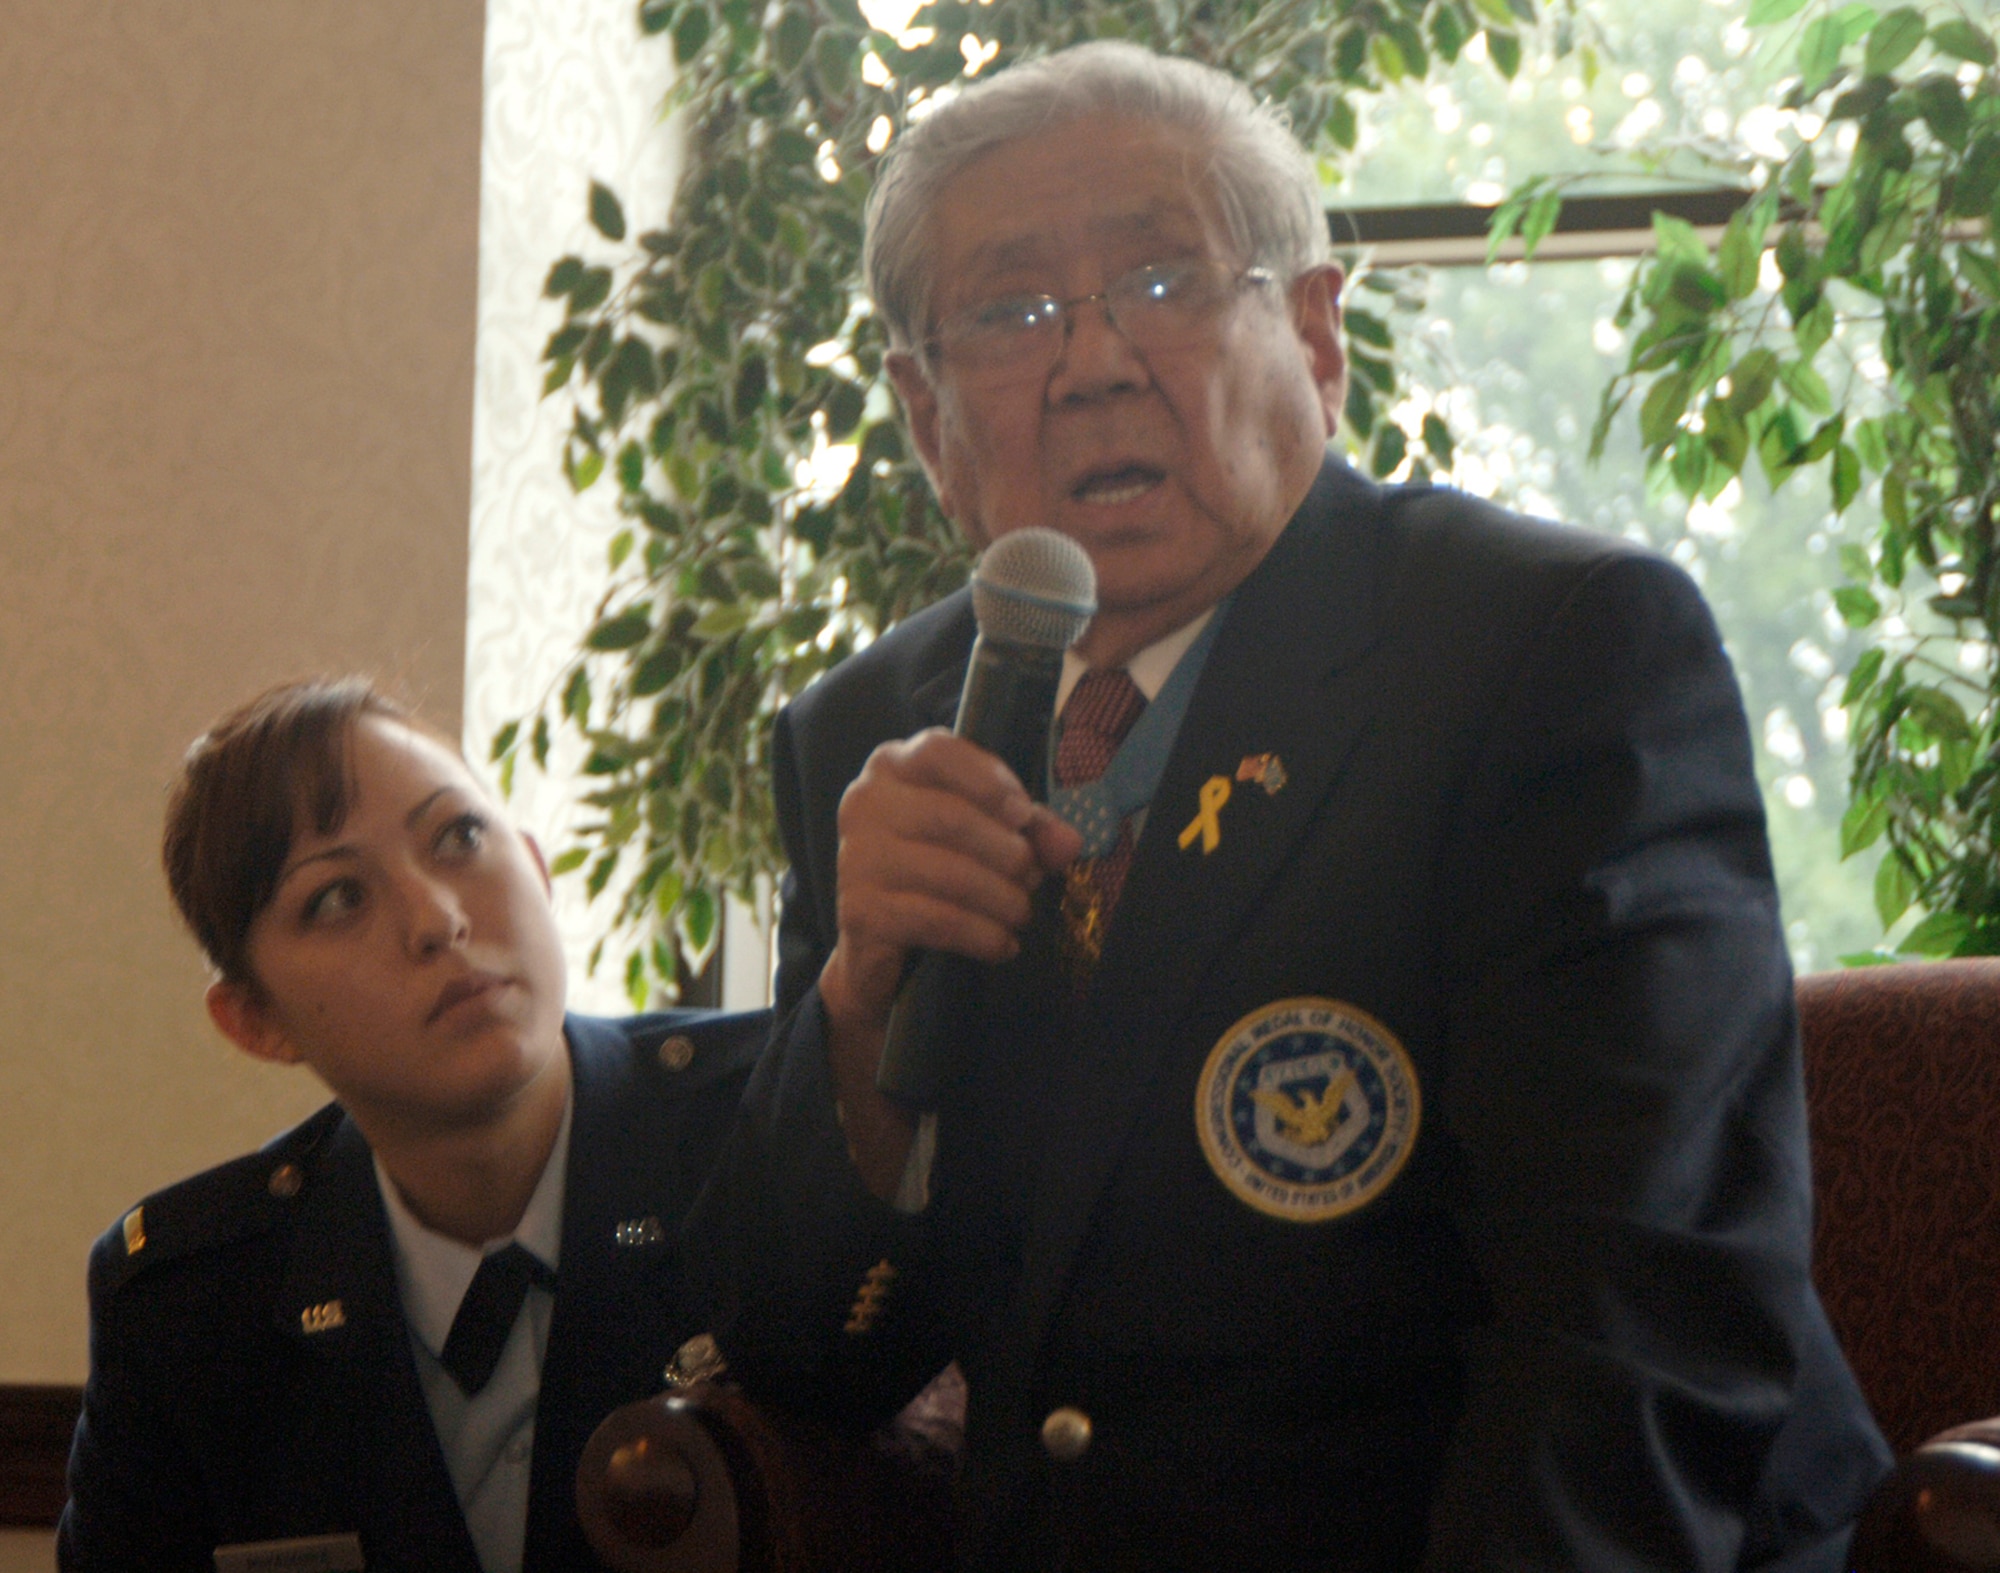 Medal of Honor recipient Hiroshi Miyamura answers questions May 17, 2010, at Scott Air Force Base, Ill., about his ordeal as a Korean War prisoner of war, with 2nd Lt. Marisa Miyamura by his side. Mr. Miyamura shared his experiences as a Korean War veteran and POW with members at Scott AFB as part of Asian-Pacific American Heritage Month celebrations. Lieutenant Miyamura is Mr. Miyamura's granddaughter. (U.S. Air Force photo/Karen Petitt) 